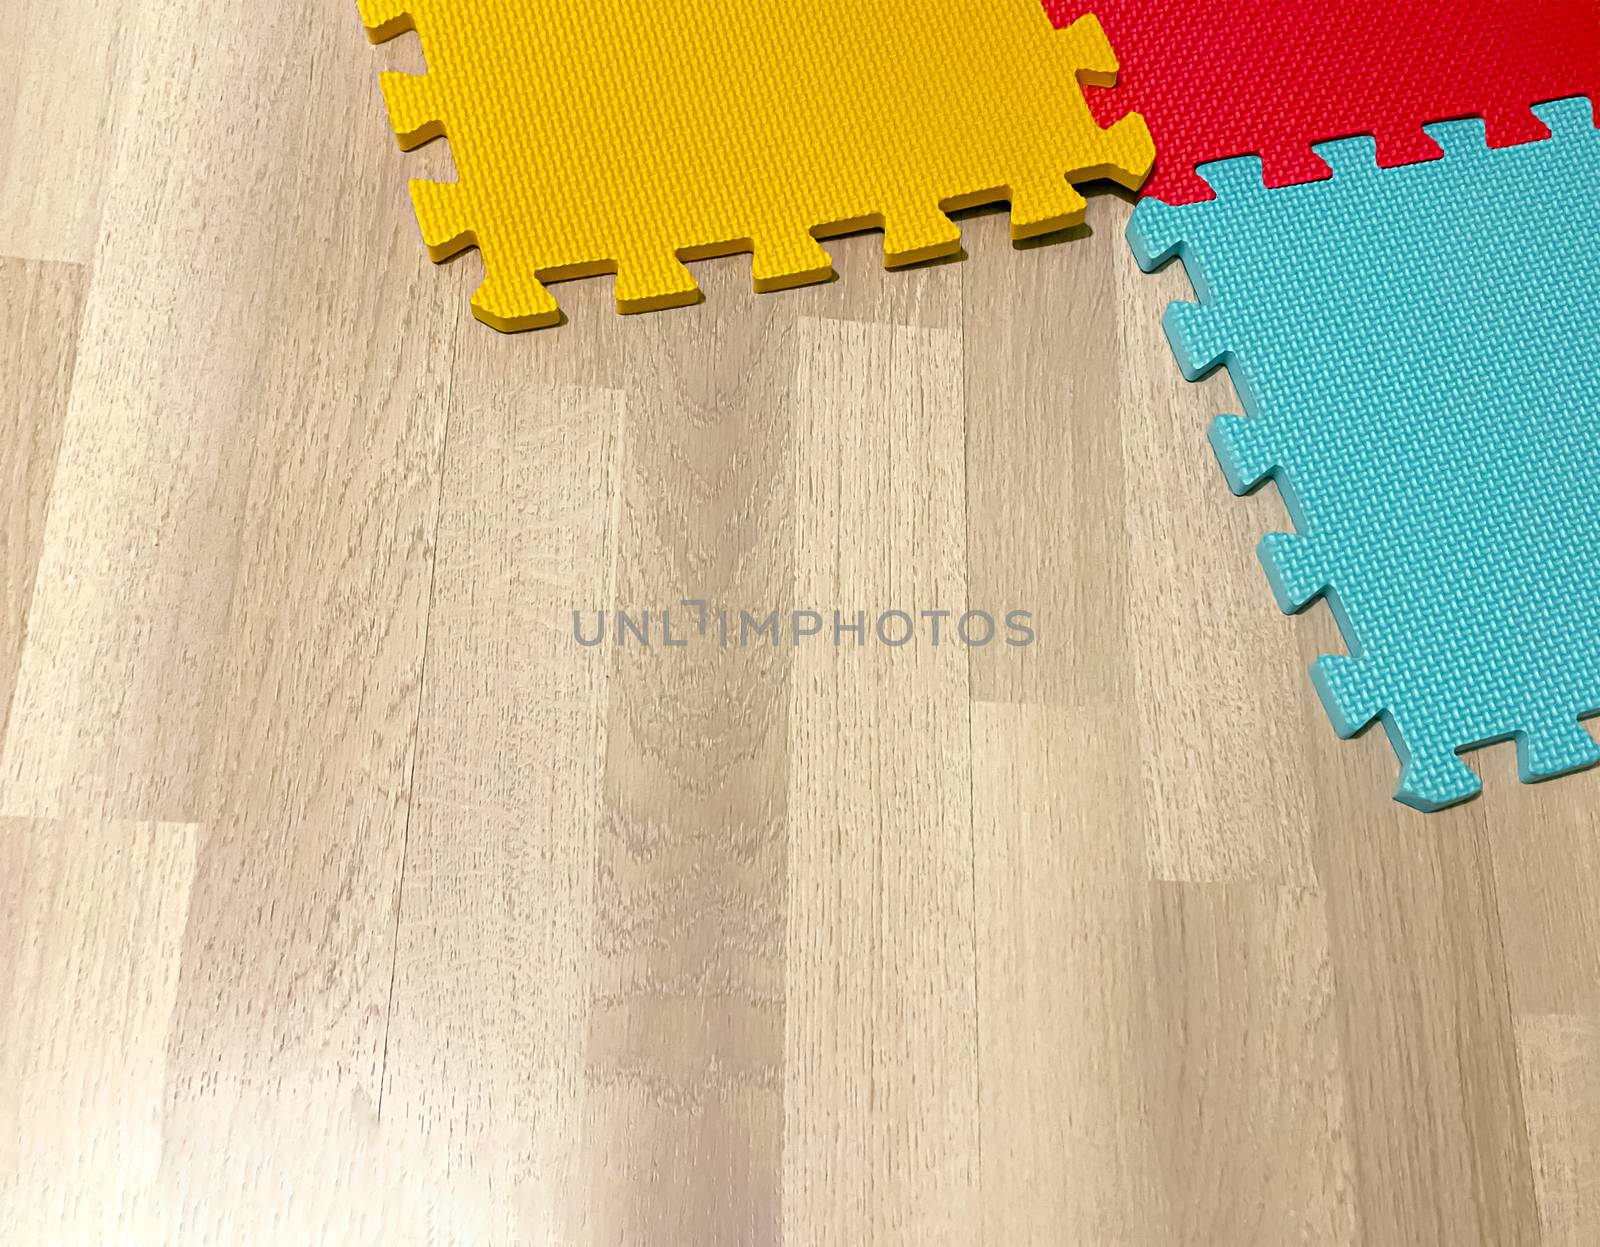 Soft rubber mat composed of colored blocks intersected with each other on a wooden floor by rarrarorro